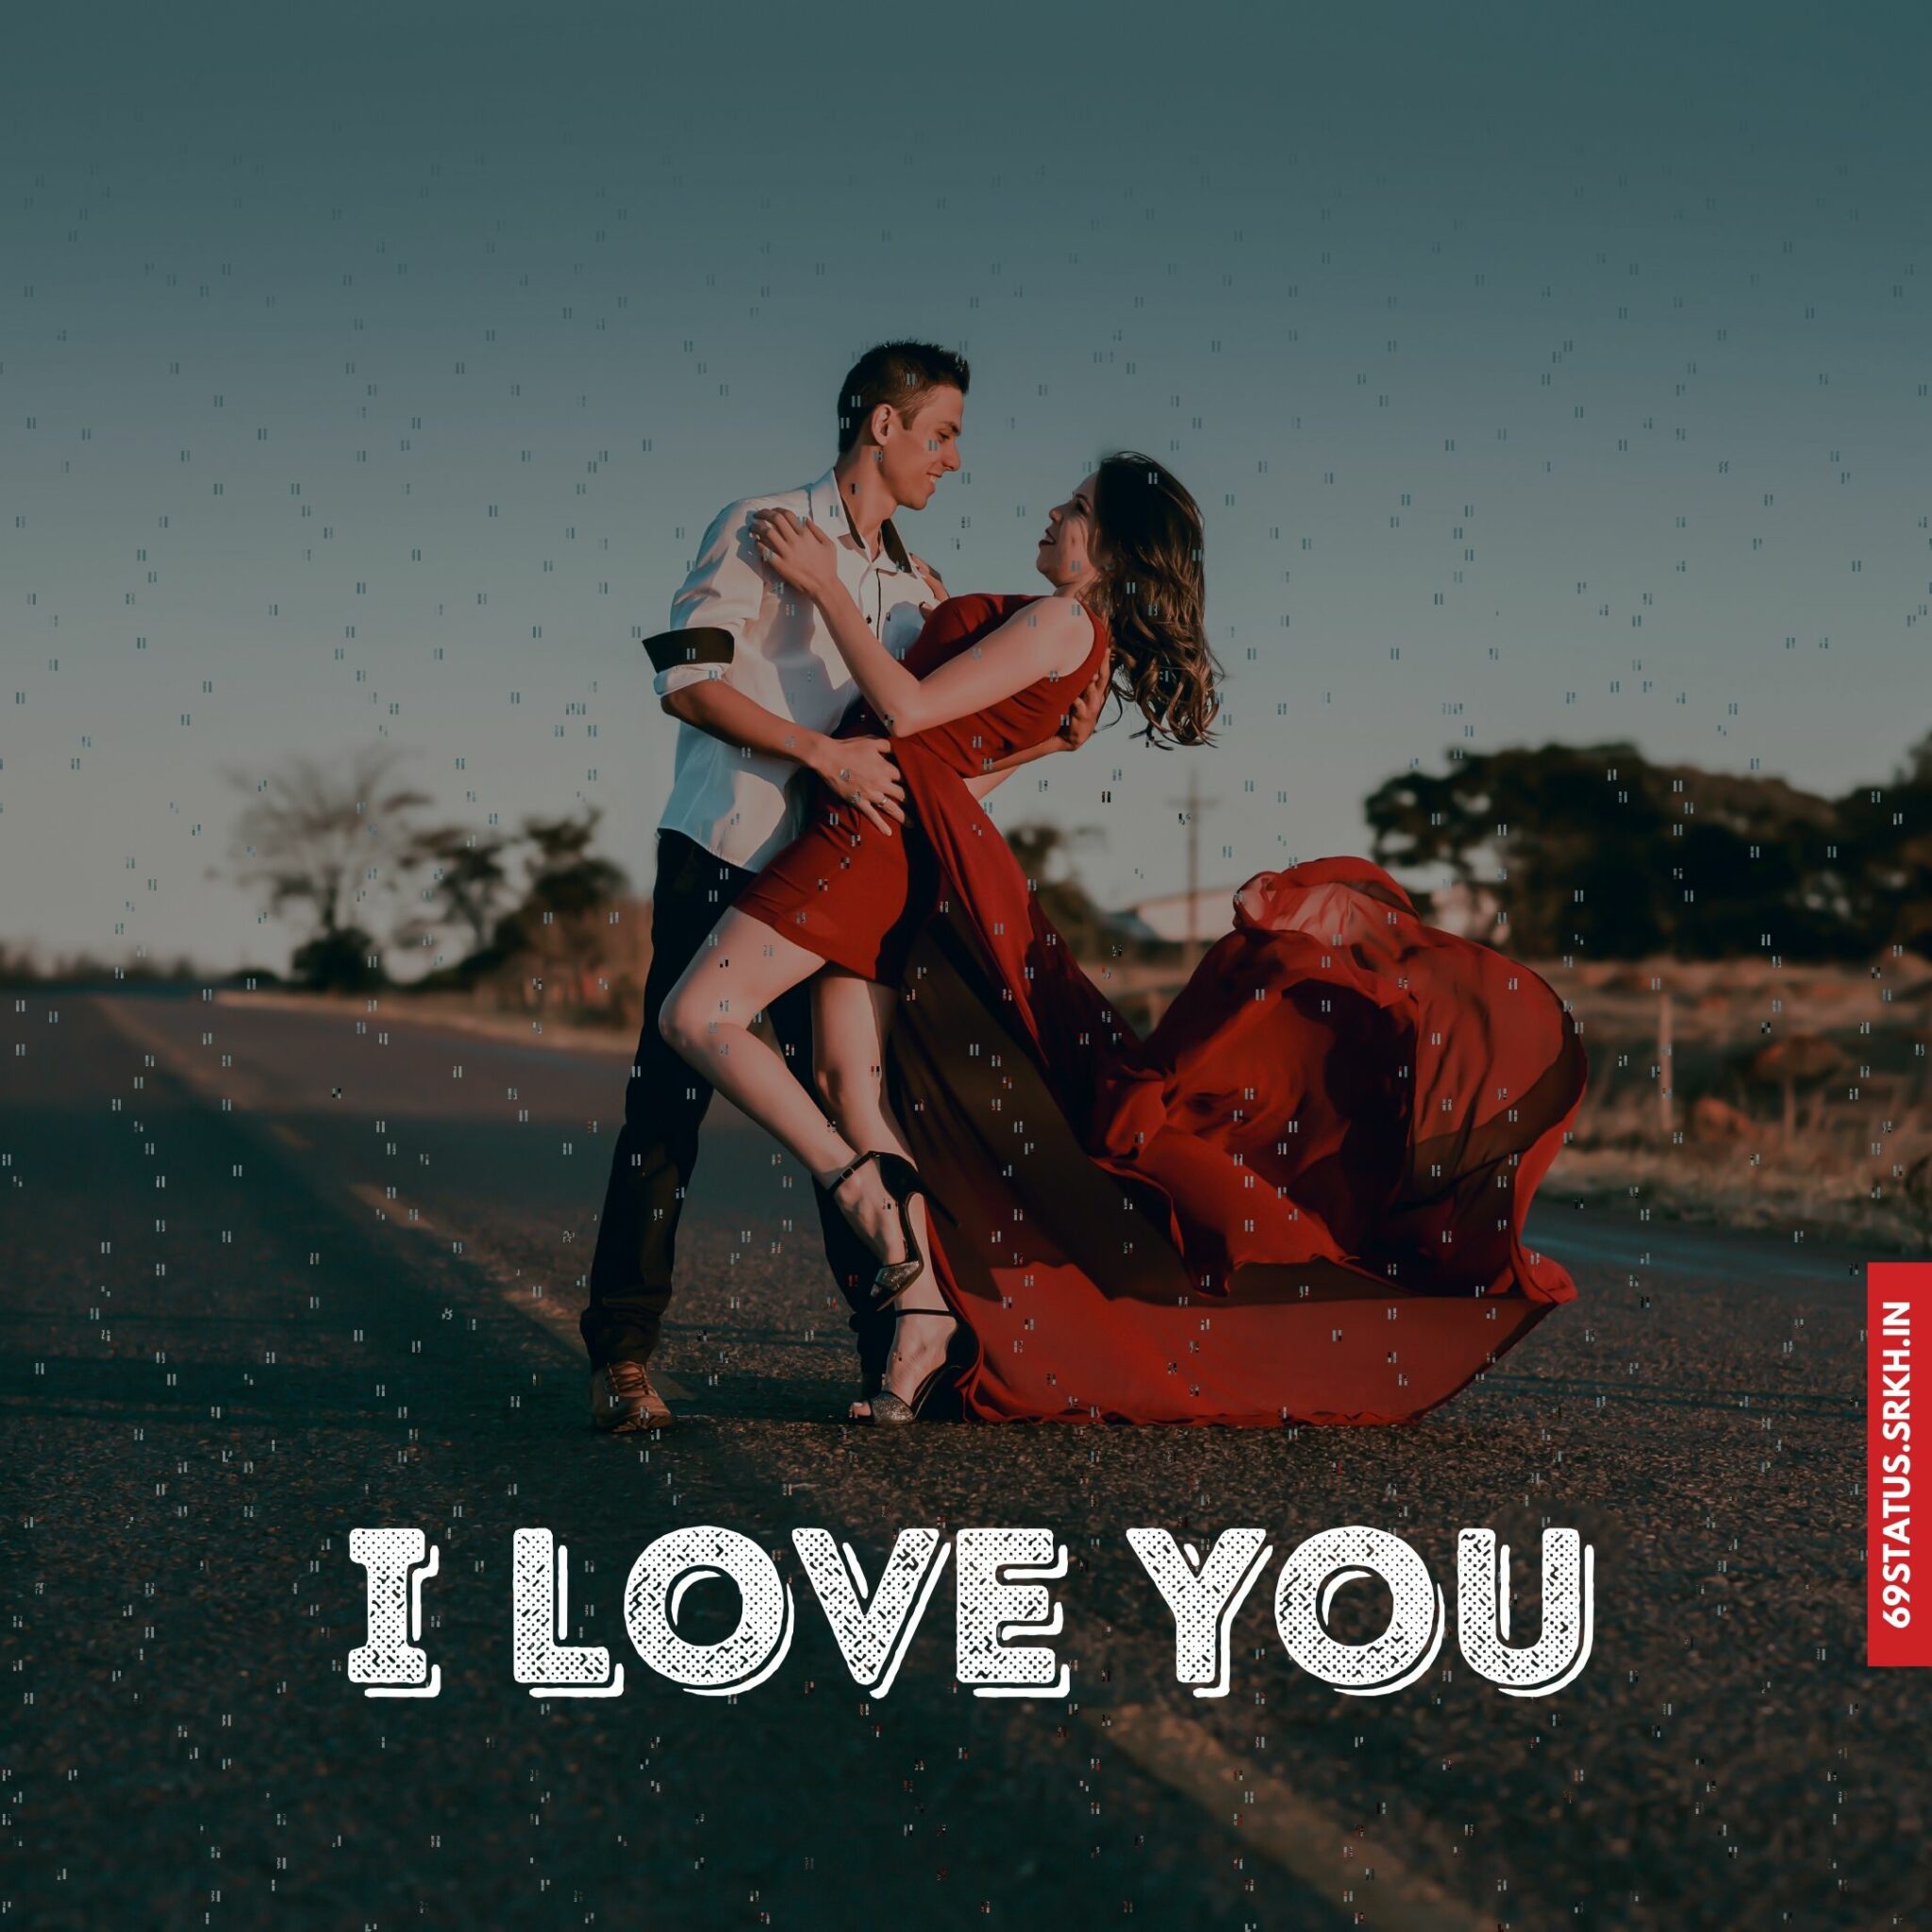 🔥 I Love You romantic images hd Download free - Images SRkh